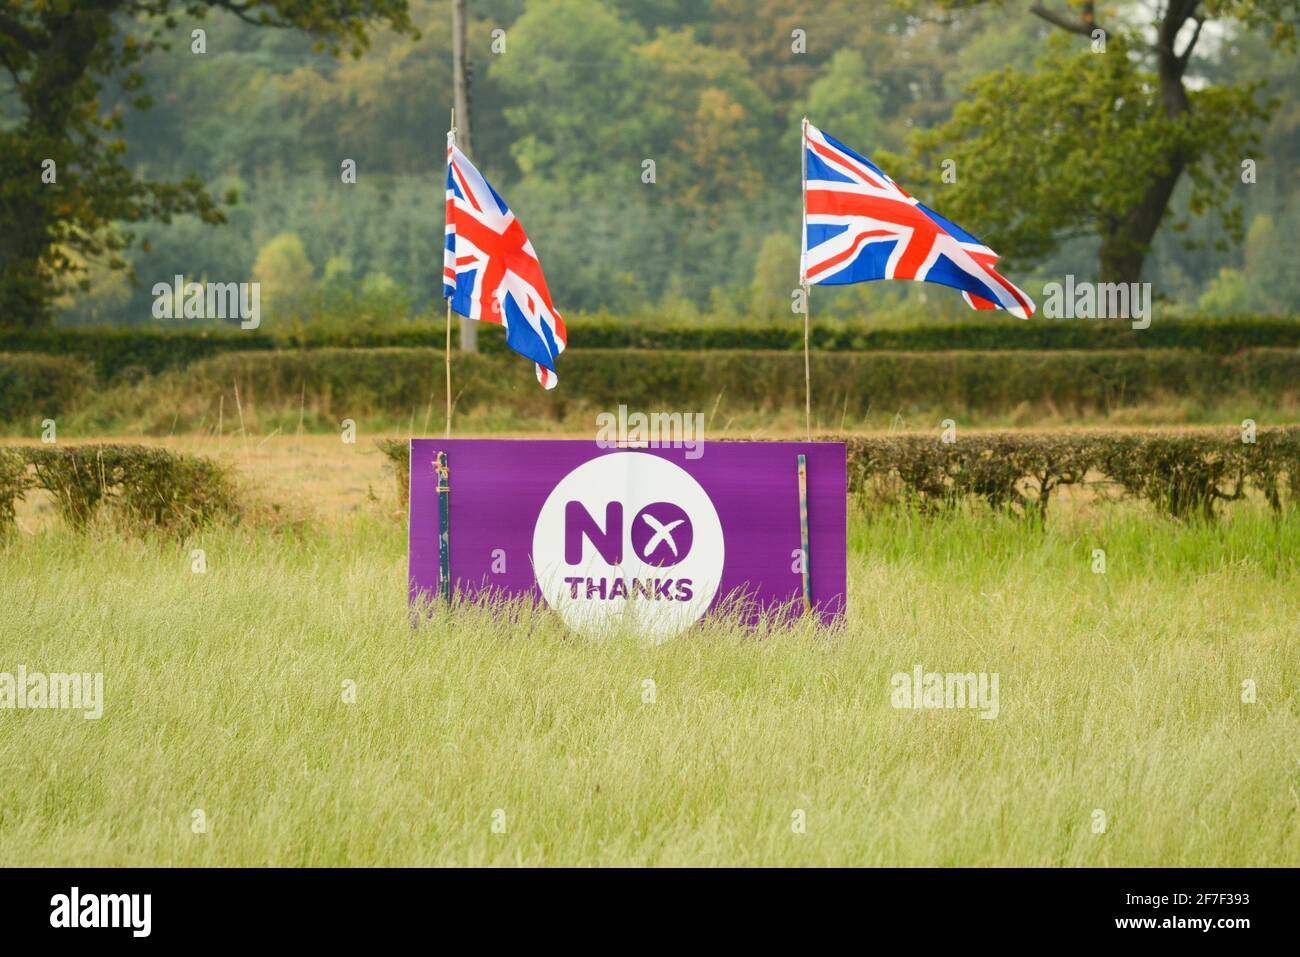 No Thanks Sign part of the Better Together campaign during the 2014 Scottish Independence Referendum, Stirling, Scotland, UK Stock Photo